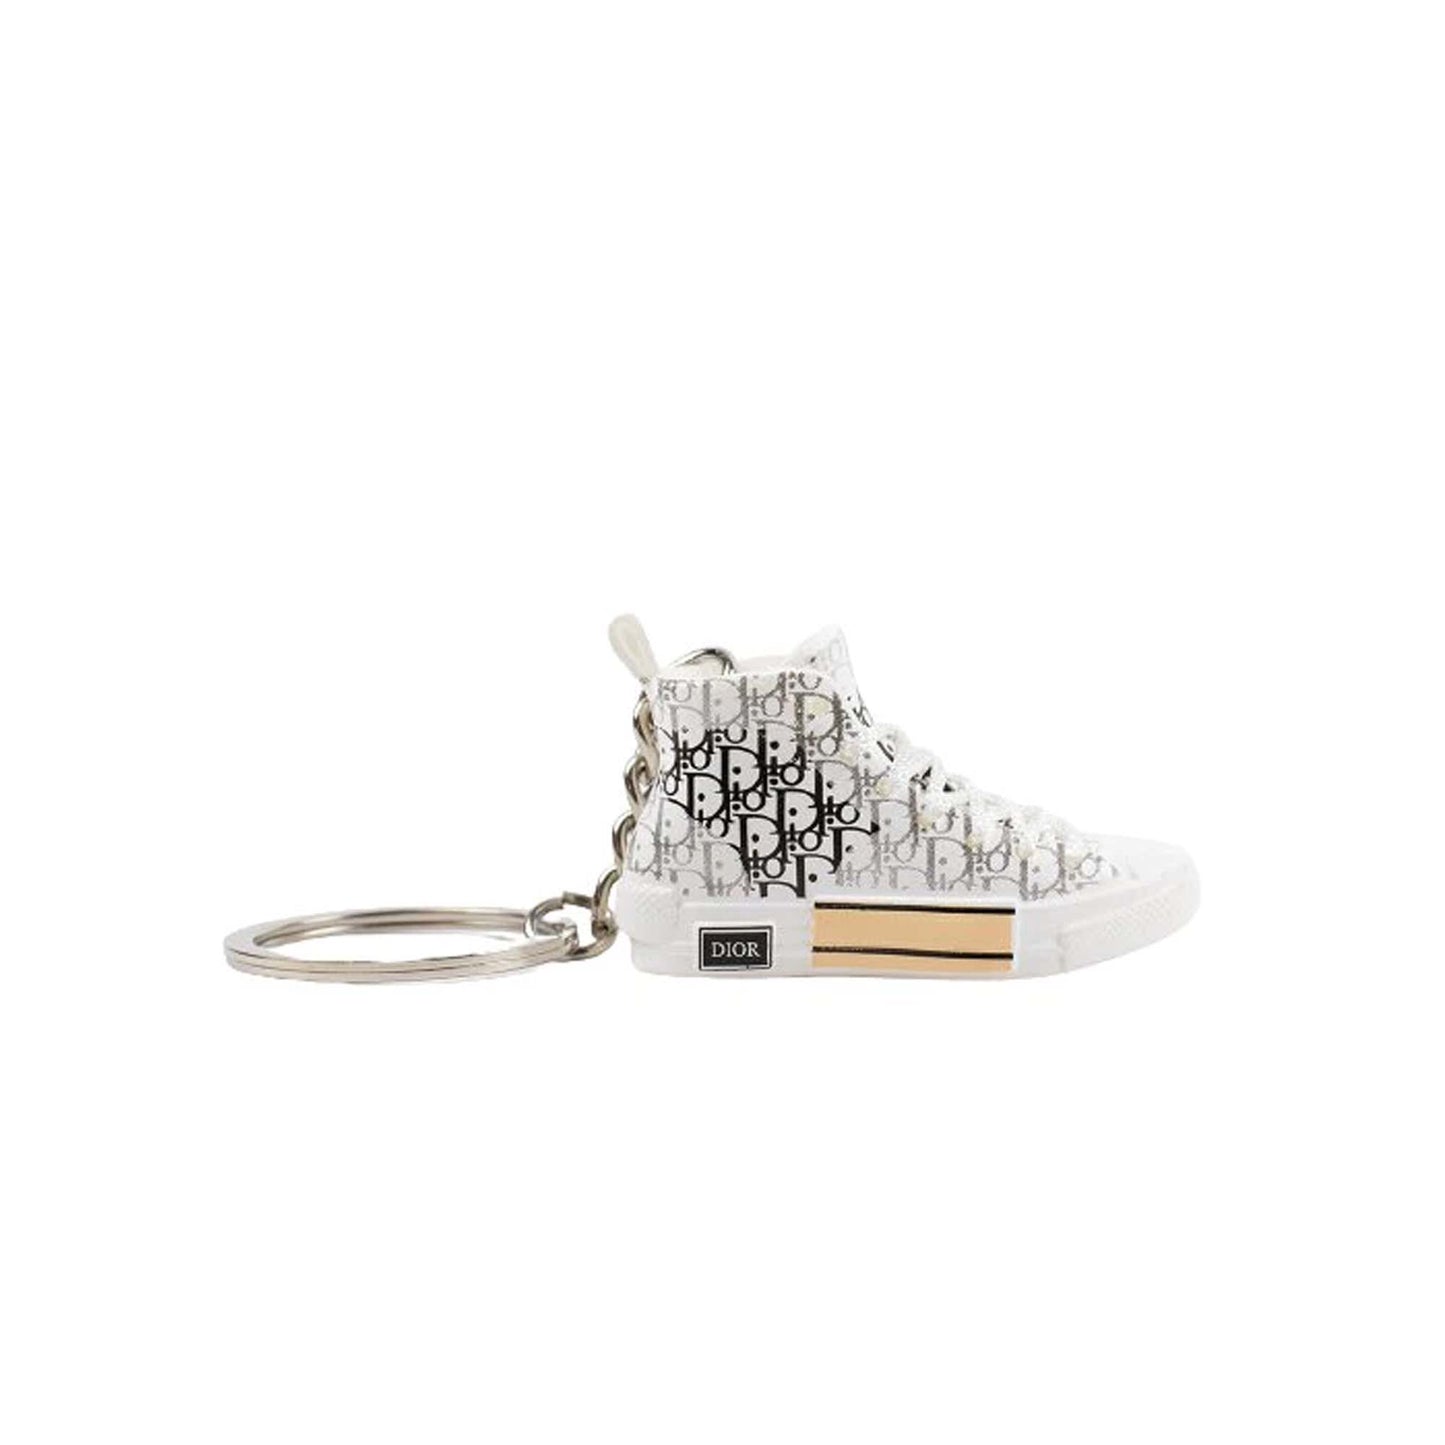 Inspired by Dior High Trainer Keyring